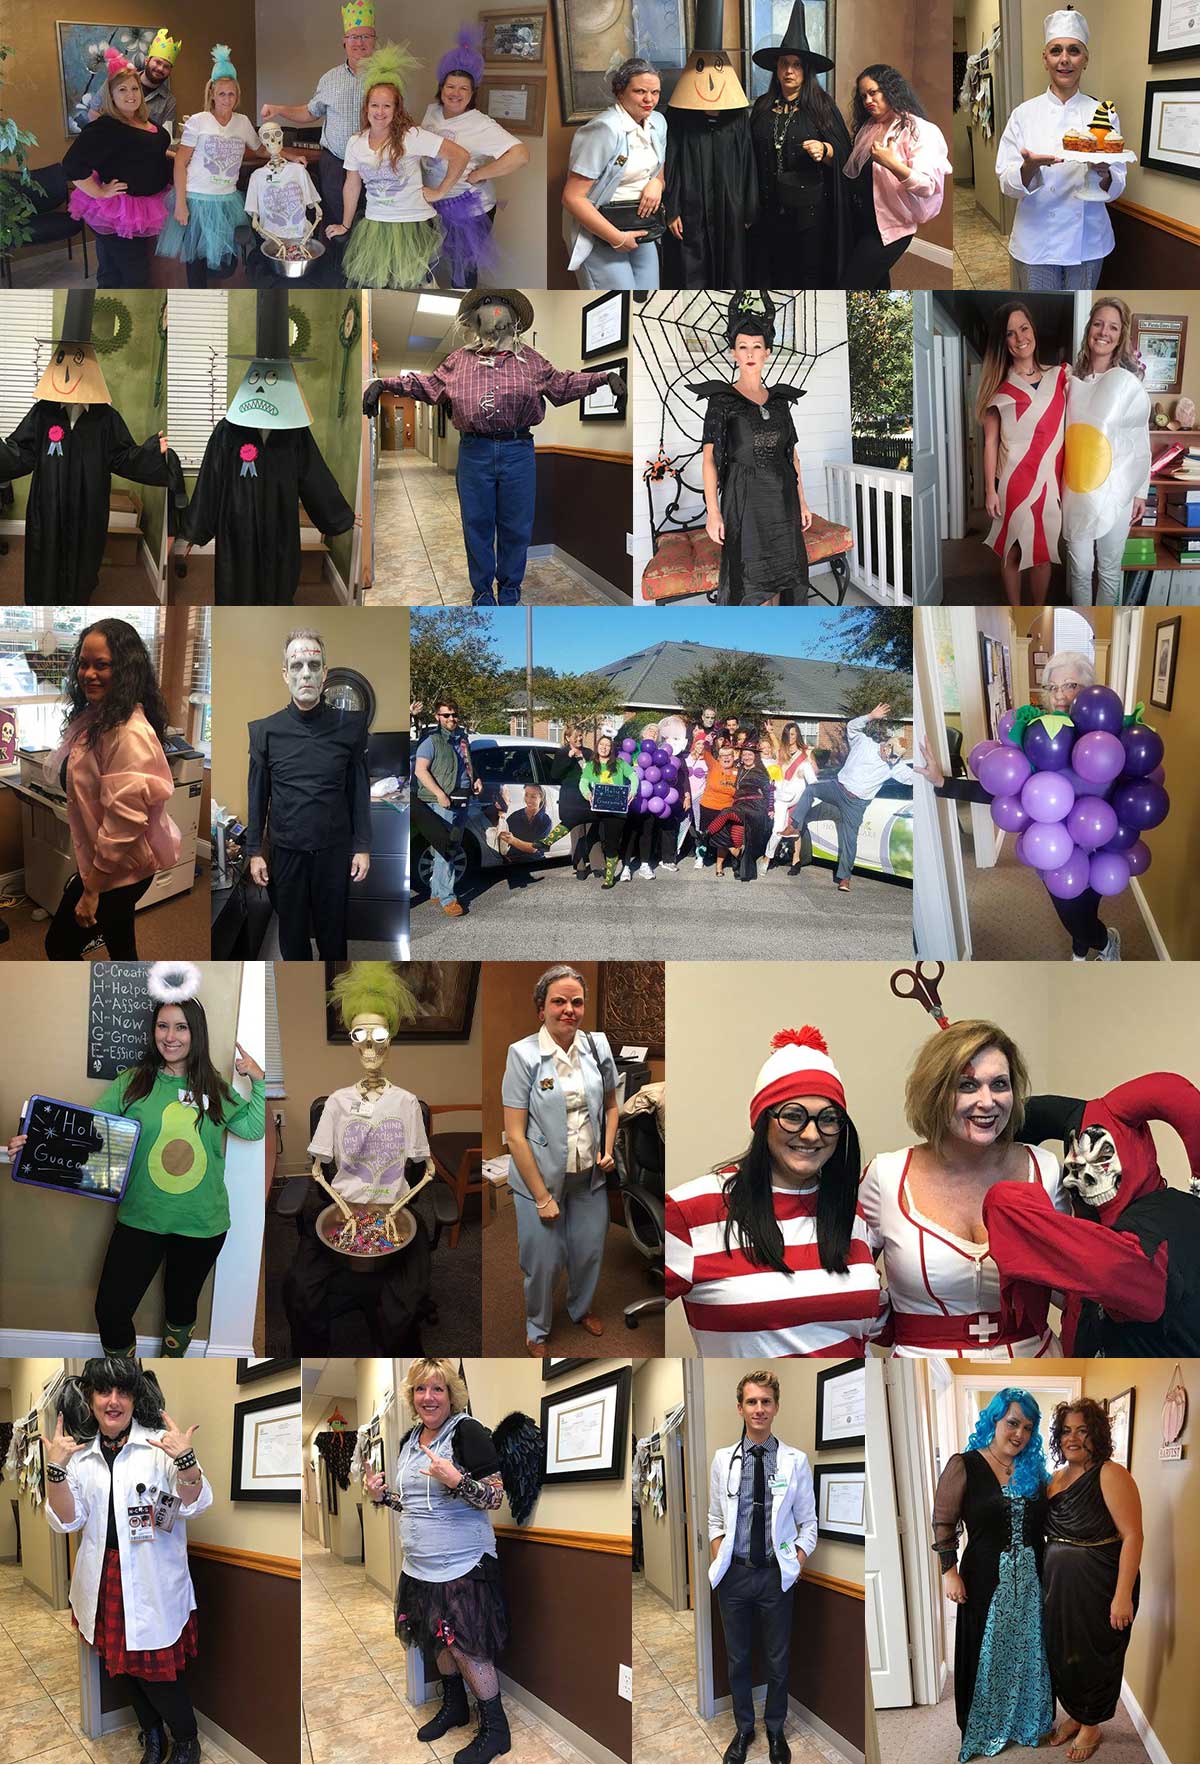 The Concierge team members dressed up for halloween